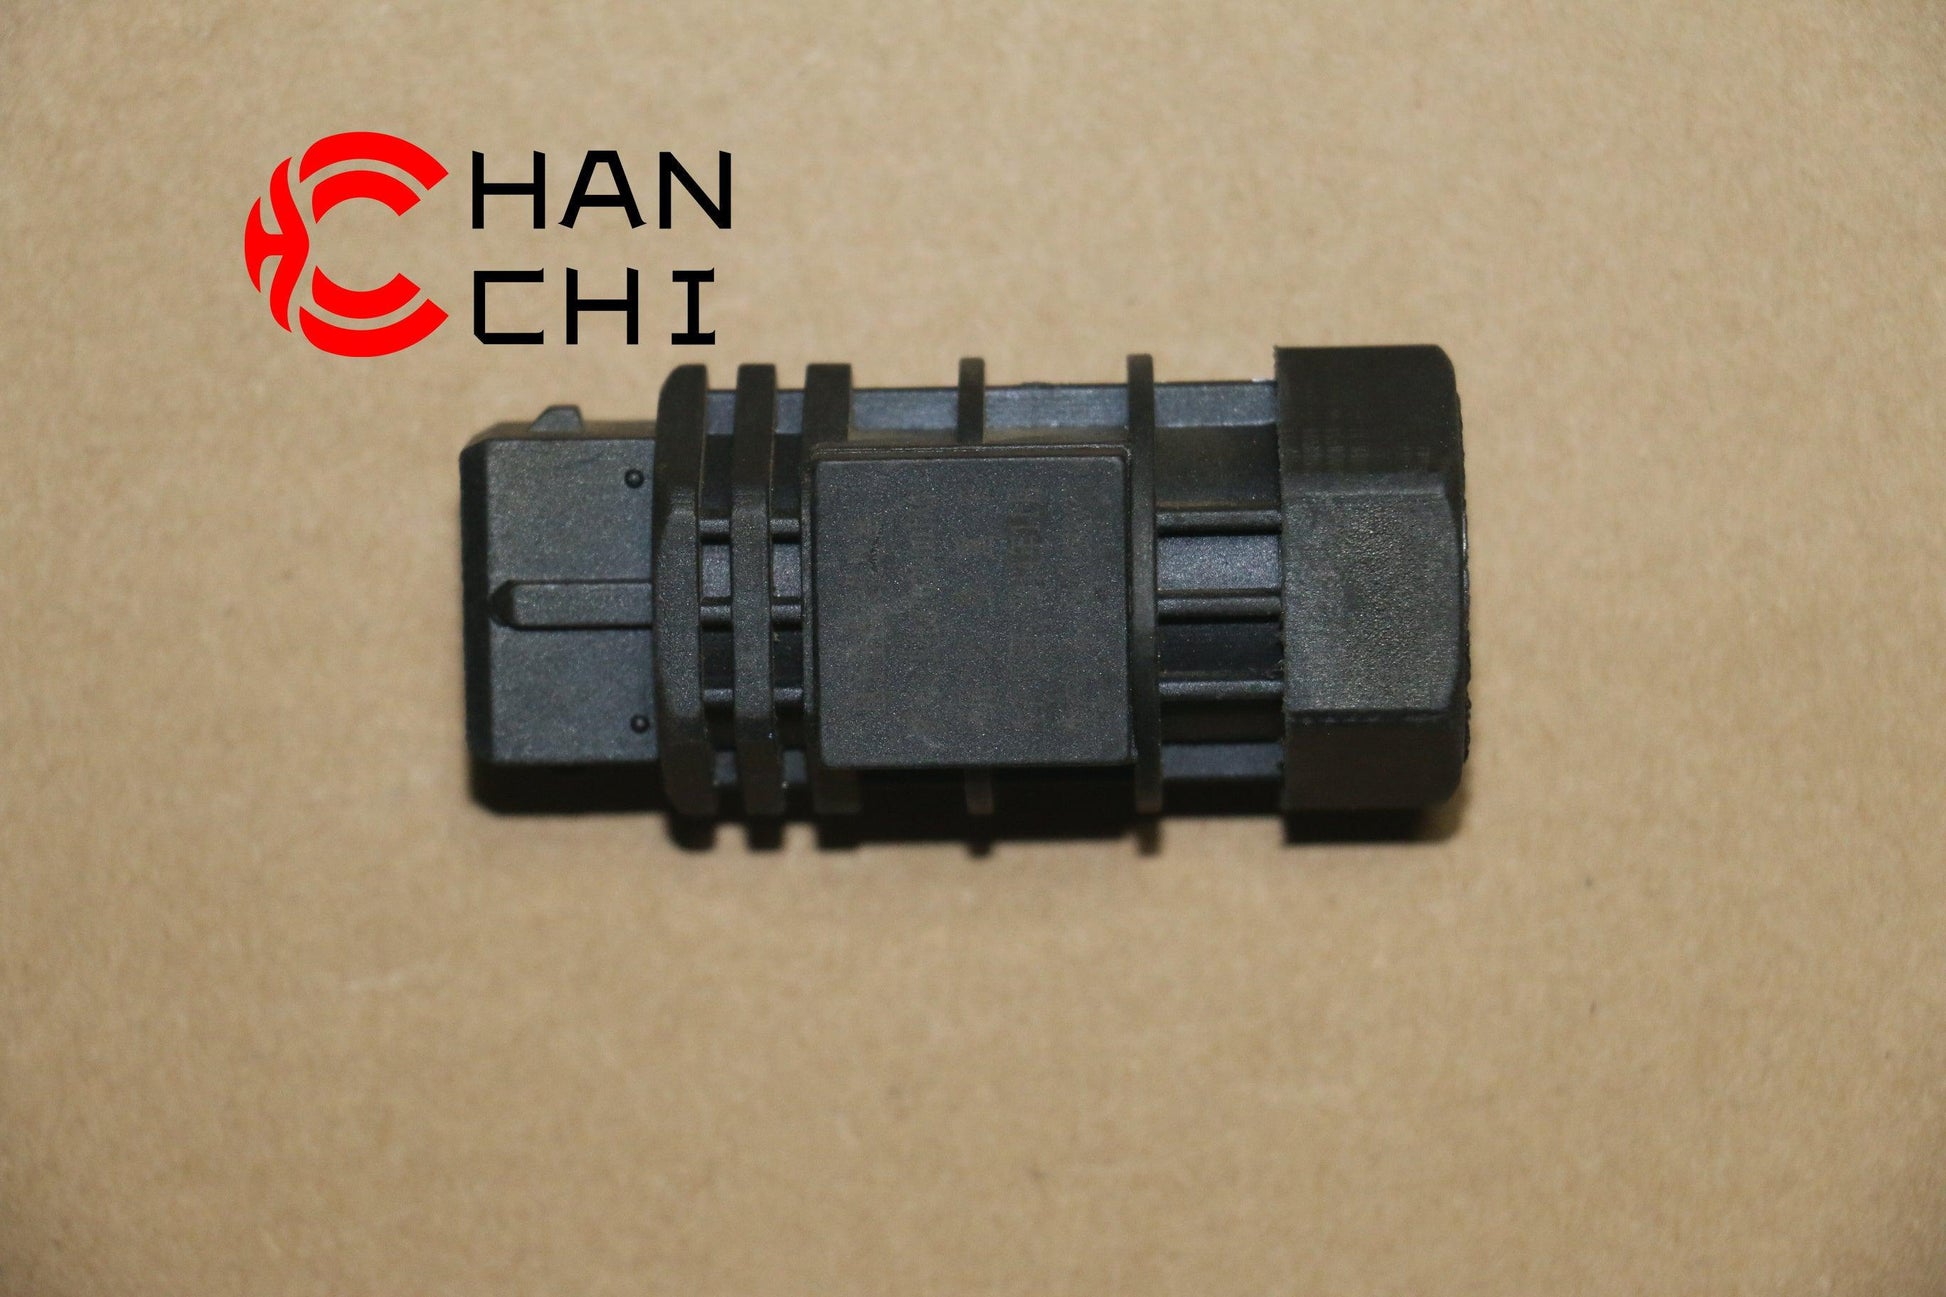 【Description】---☀Welcome to HANCHI☀---✔Good Quality✔Generally Applicability✔Competitive PriceEnjoy your shopping time↖（^ω^）↗【Features】Brand-New with High Quality for the Aftermarket.Totally mathced your need.**Stable Quality**High Precision**Easy Installation**【Specification】OEM: H4381020001A0 Speed Meter SensorMaterial: metalColor: black Origin: Made in ChinaWeight: 100g【Packing List】1* Speed Sensor 【More Service】 We can provide OEM service We can Be your one-step solution for Auto Parts We can